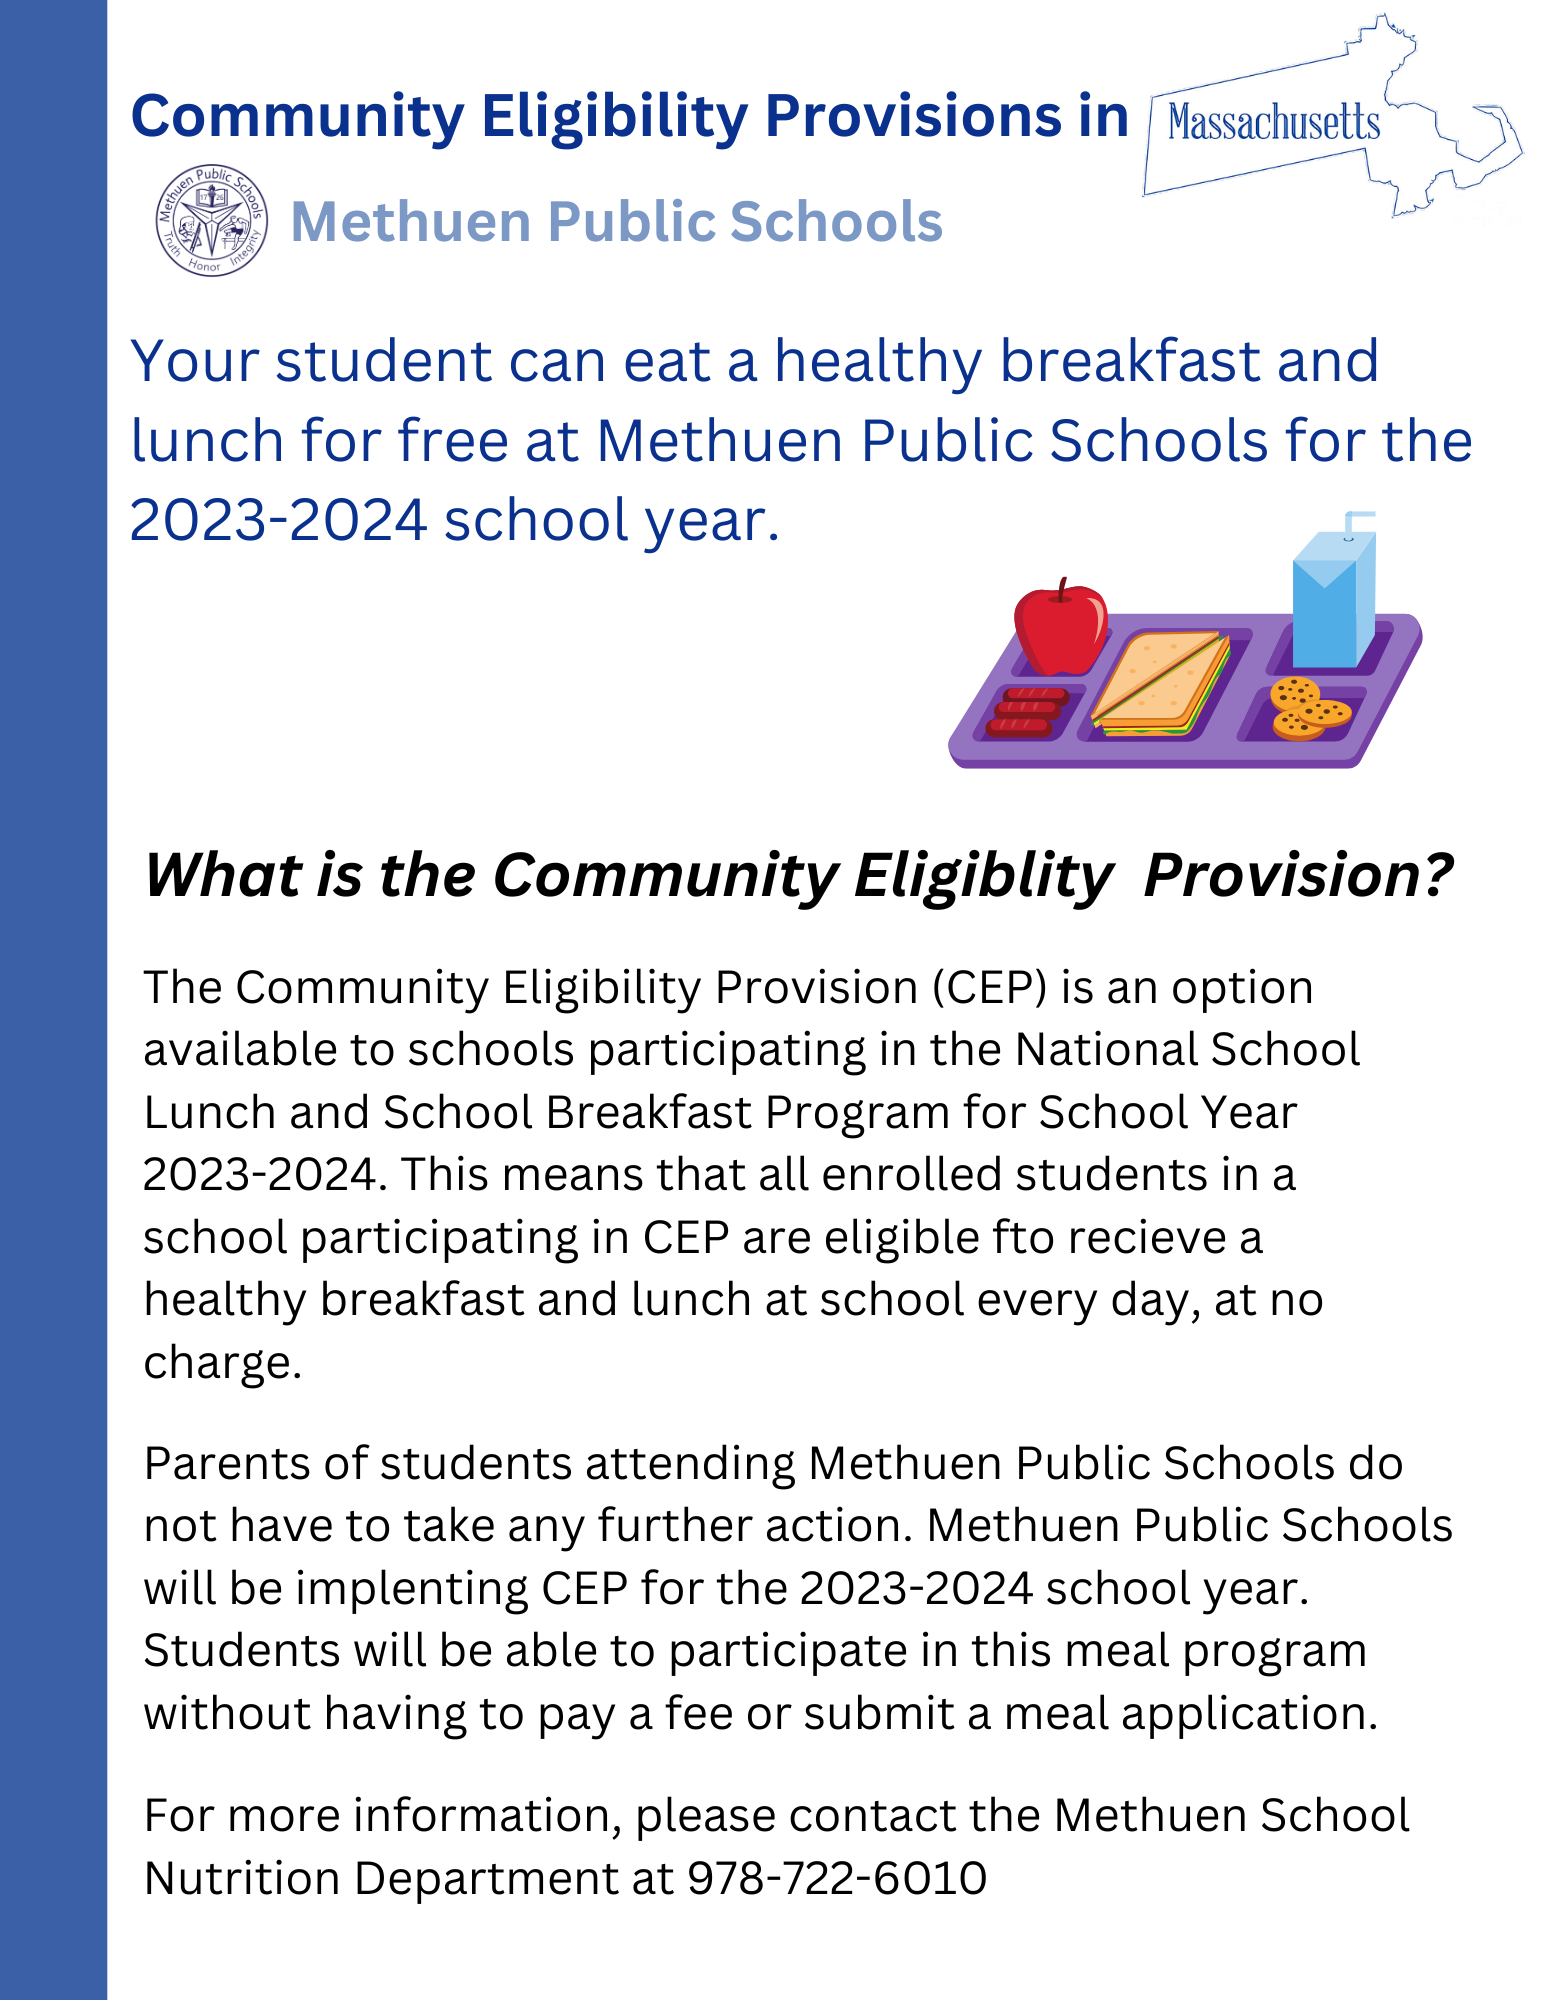 Community Eligibility Provisions in.png